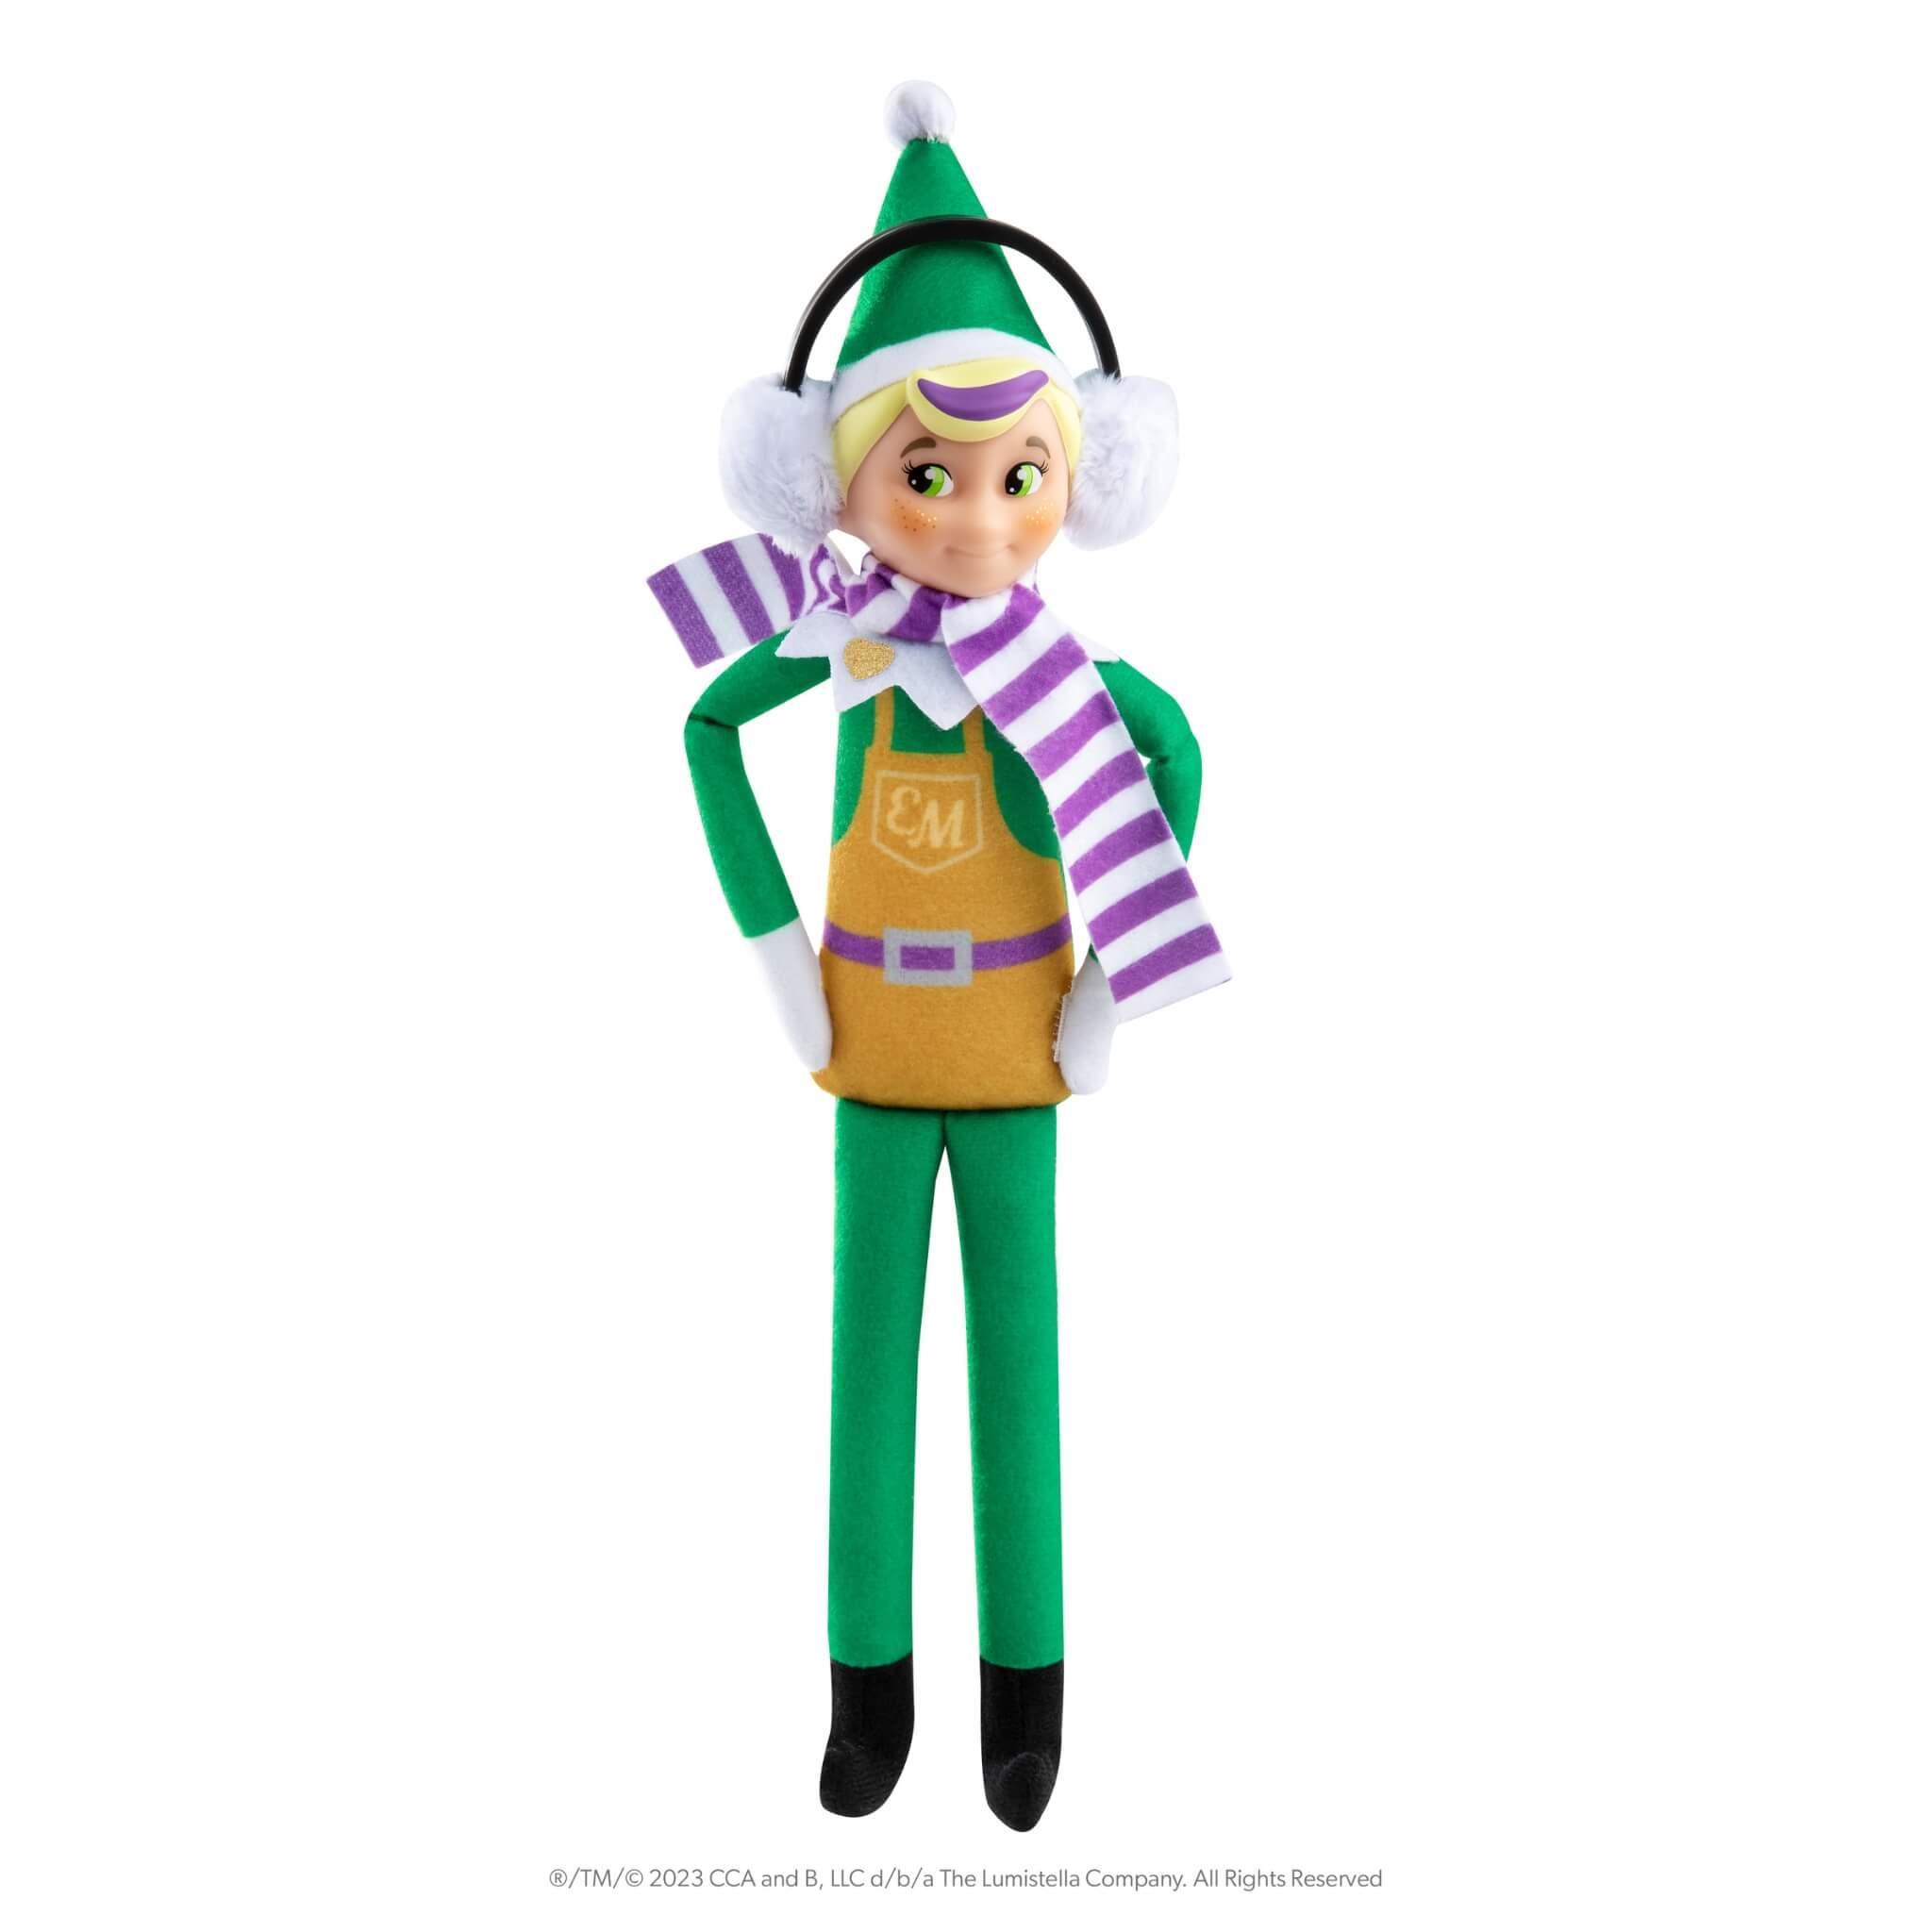 The Elf On The Shelf®: The Ultimate Christmas Collection DVD - The Elf on  The Shelf